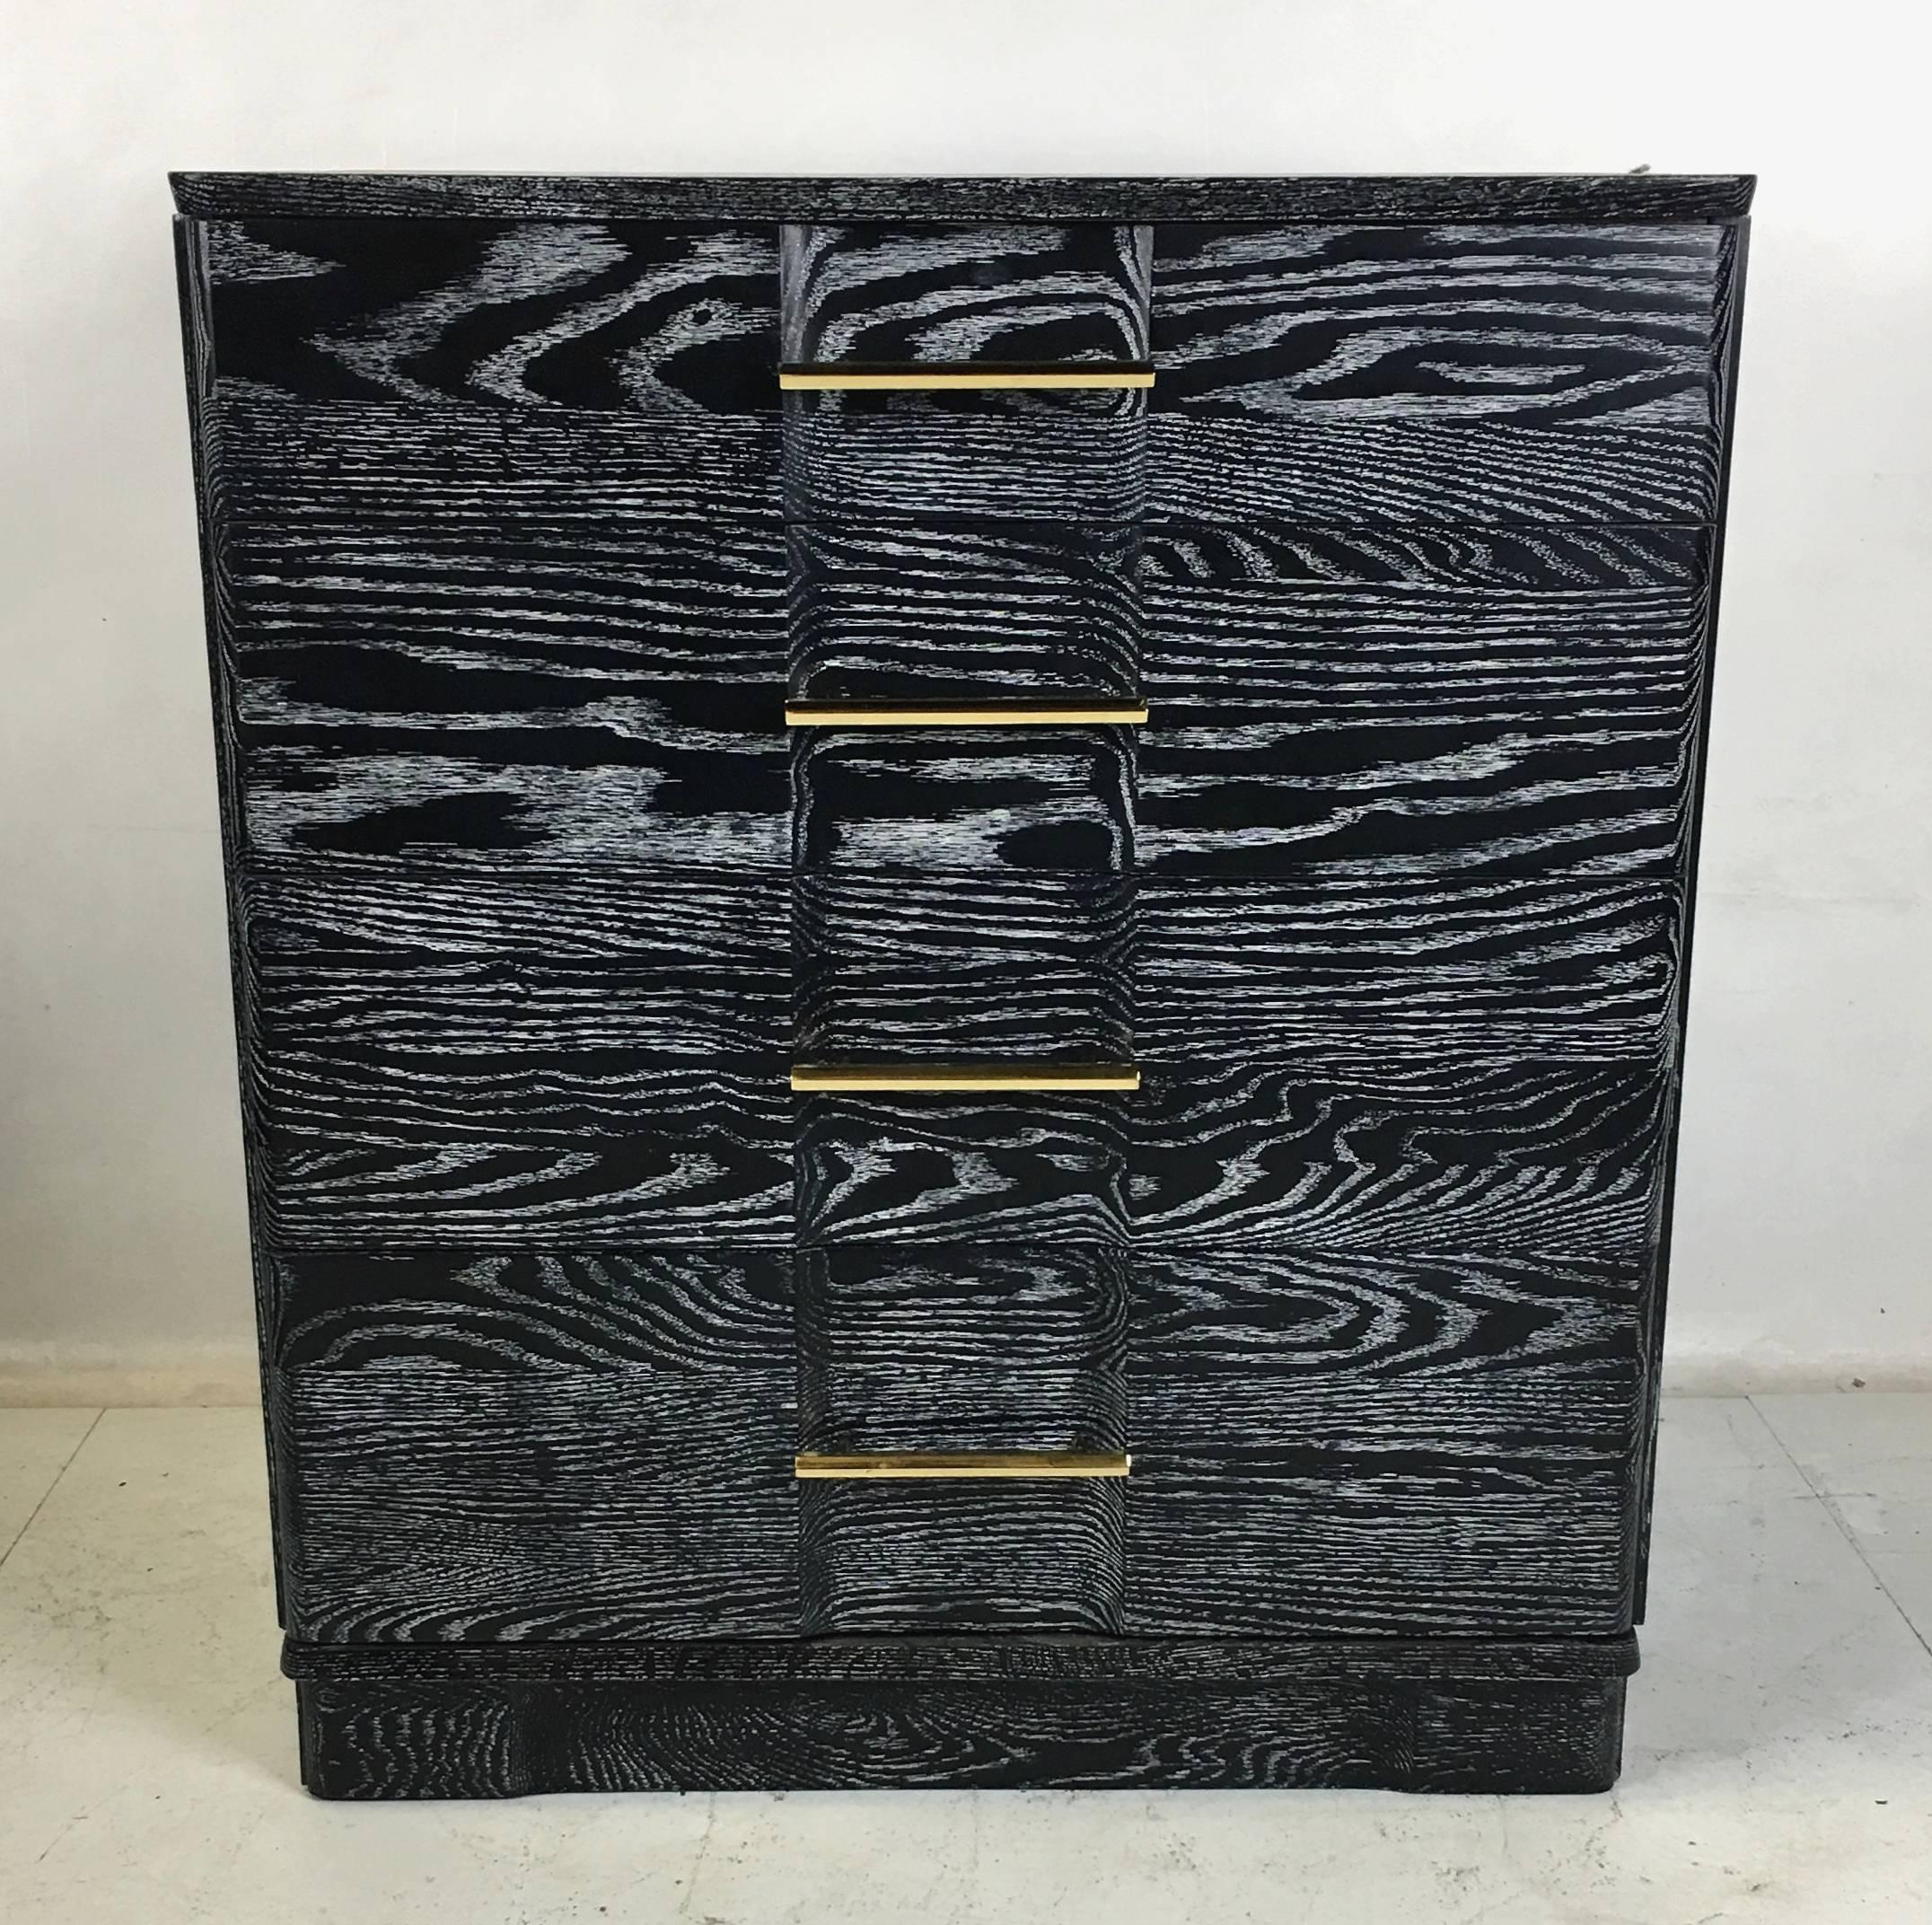 Handsome pair of breakfront chests in ebonized and cerused oak. This fine pair of chest have dovetailed oak drawer boxes that slide beautifully, like the day they were made. Polished Brass pulls. Top quality construction.  All work done with